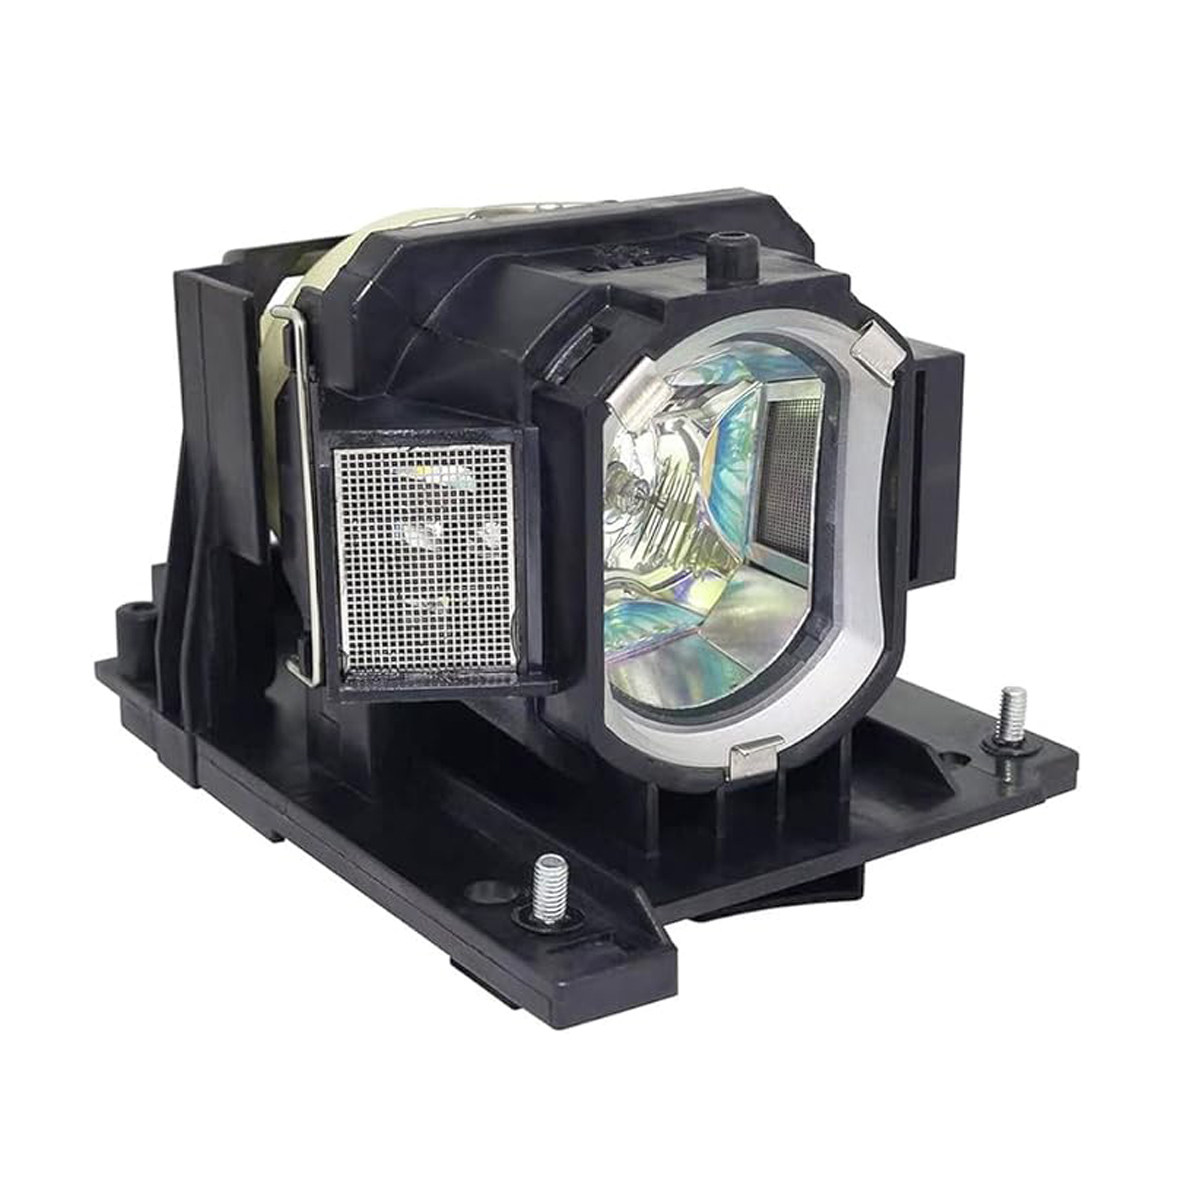 Replacement Projector lamp 78-6972-0050-5 For 3M X56